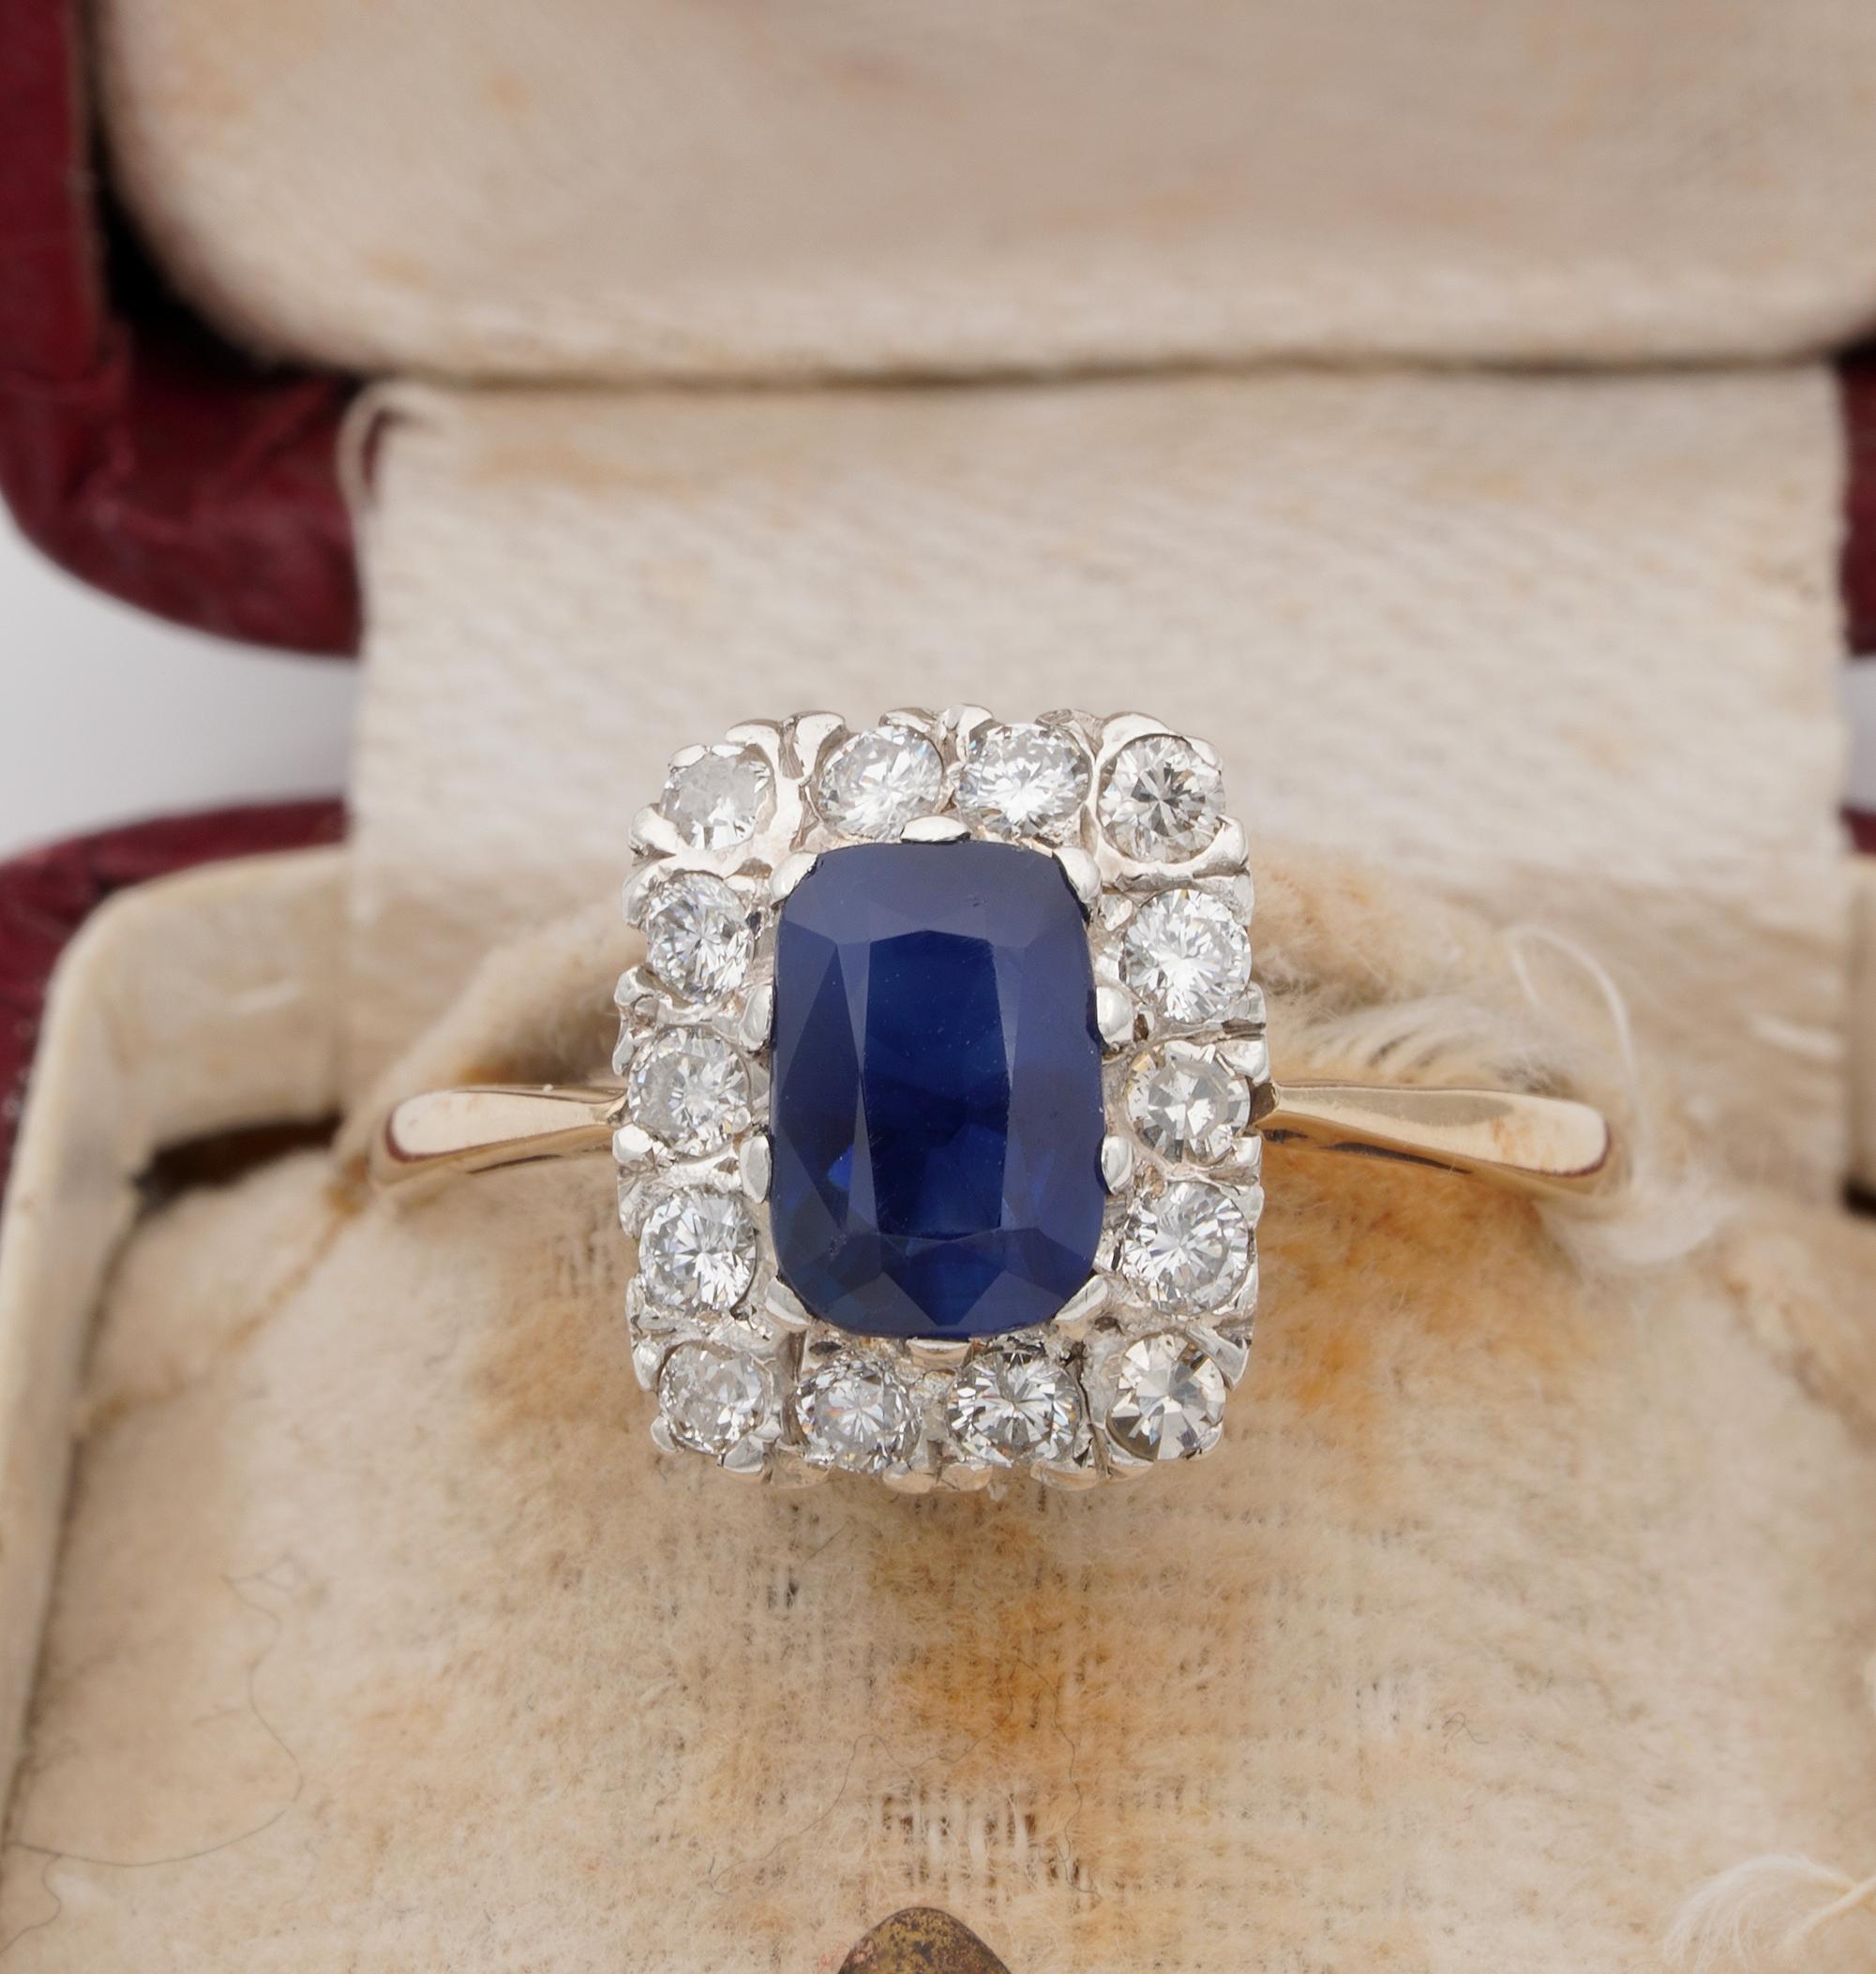 This beautiful late Art Deco hand crafted during 1935 ca
Charming traditional design made of 18 Kt gold with a Platinum top
Crown is a Diamond halo framing the centre Sapphire in a tasteful and timeless style
Natural Sapphire is rectangular Cushion